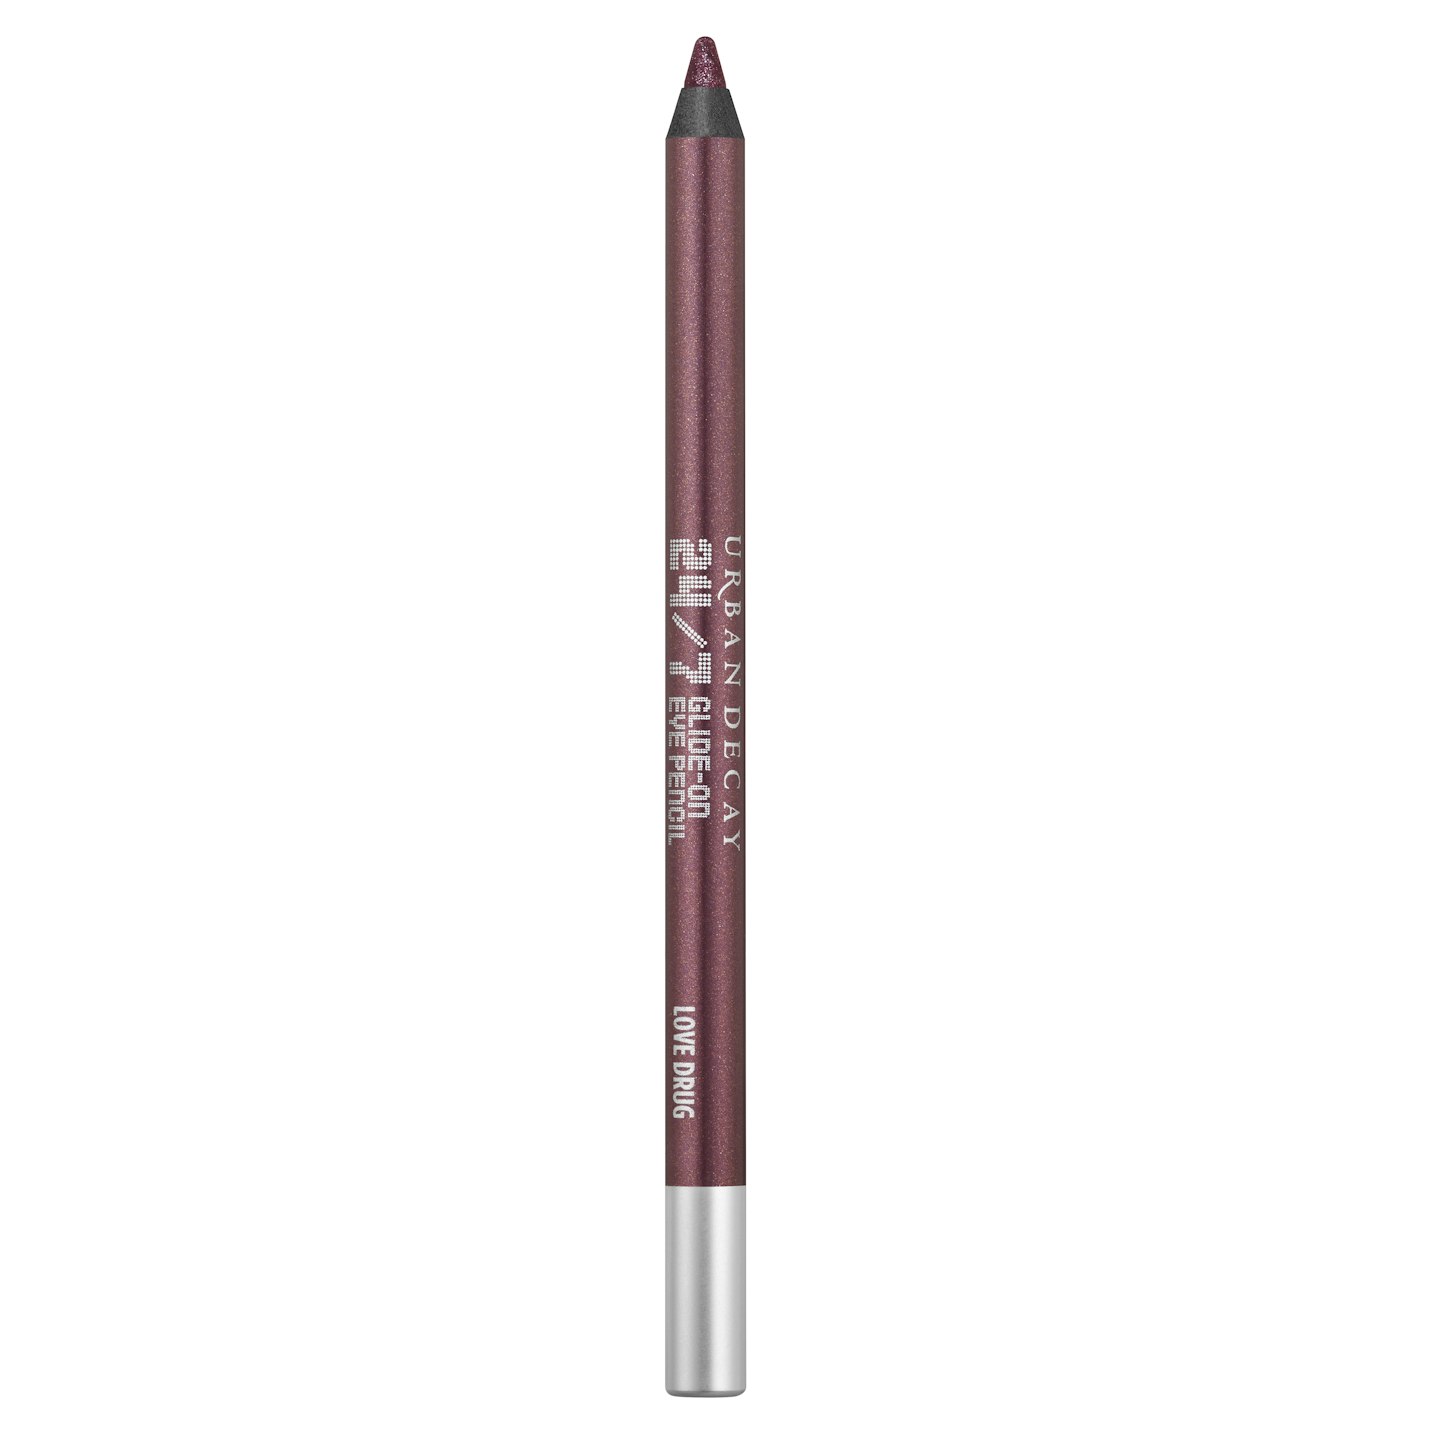 Urban Decay Naked Cherry 24/7 Glide- on Eye Pencil, £15.50